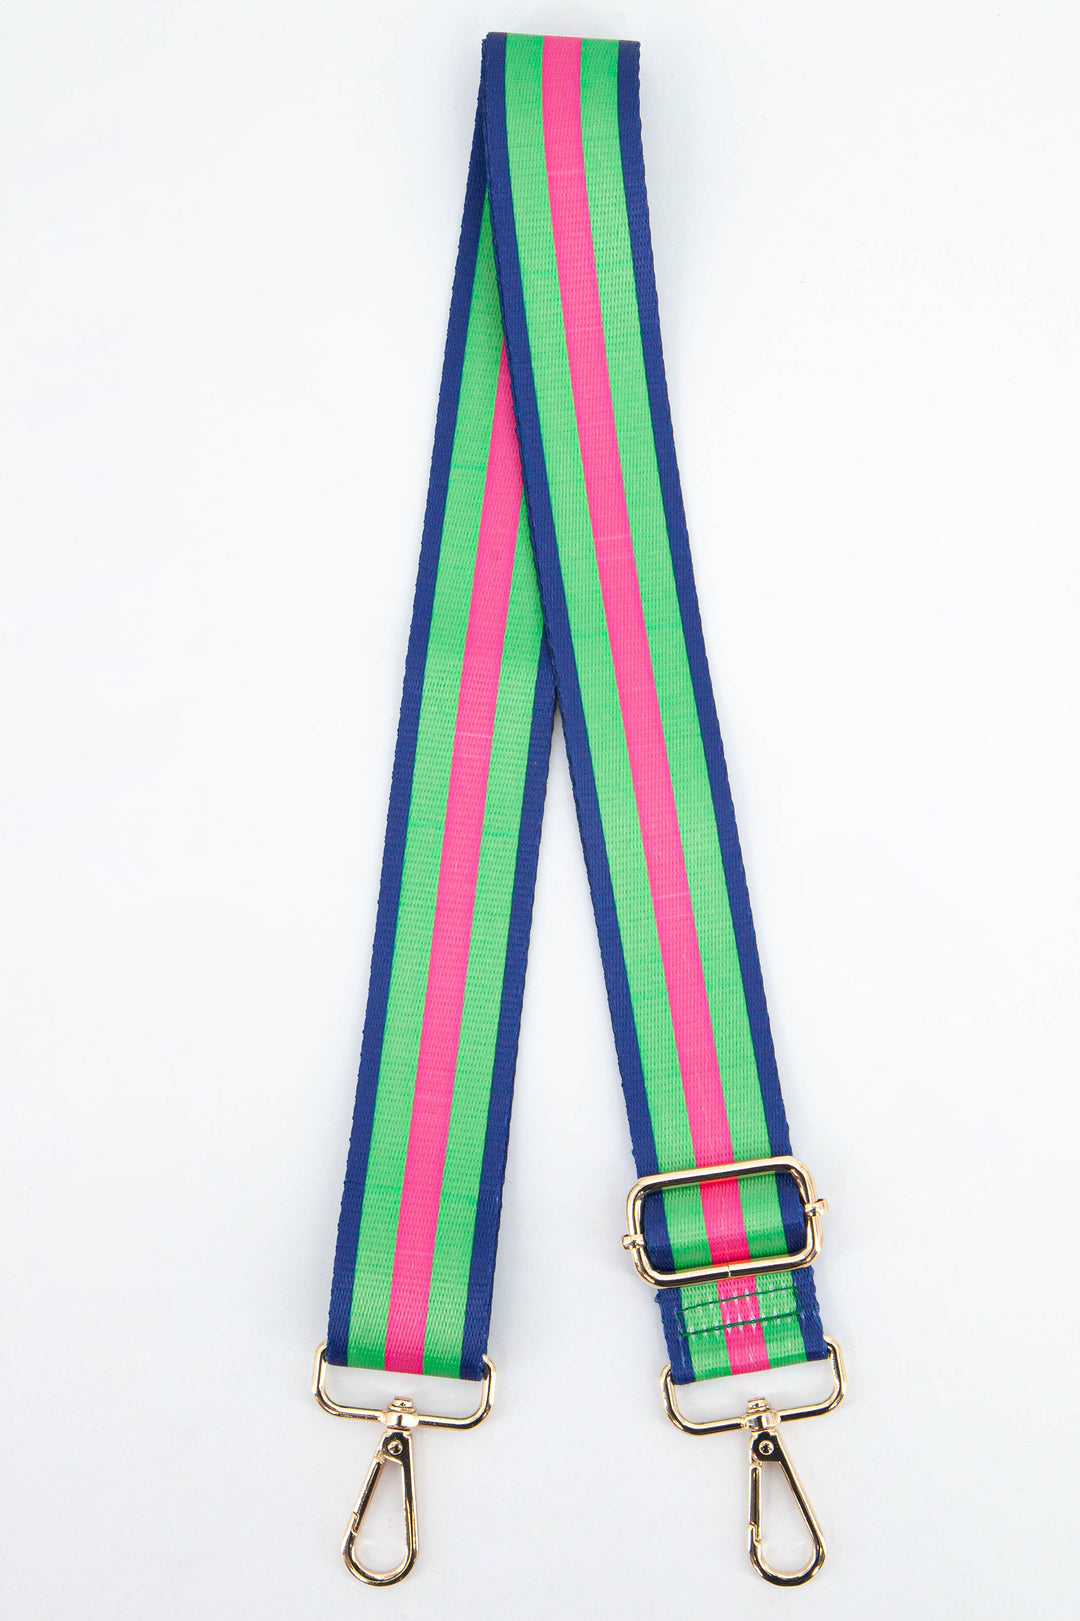 navy blue, green and pink contrasting colour block stripe bag strap with gold clip on snap hook attachments